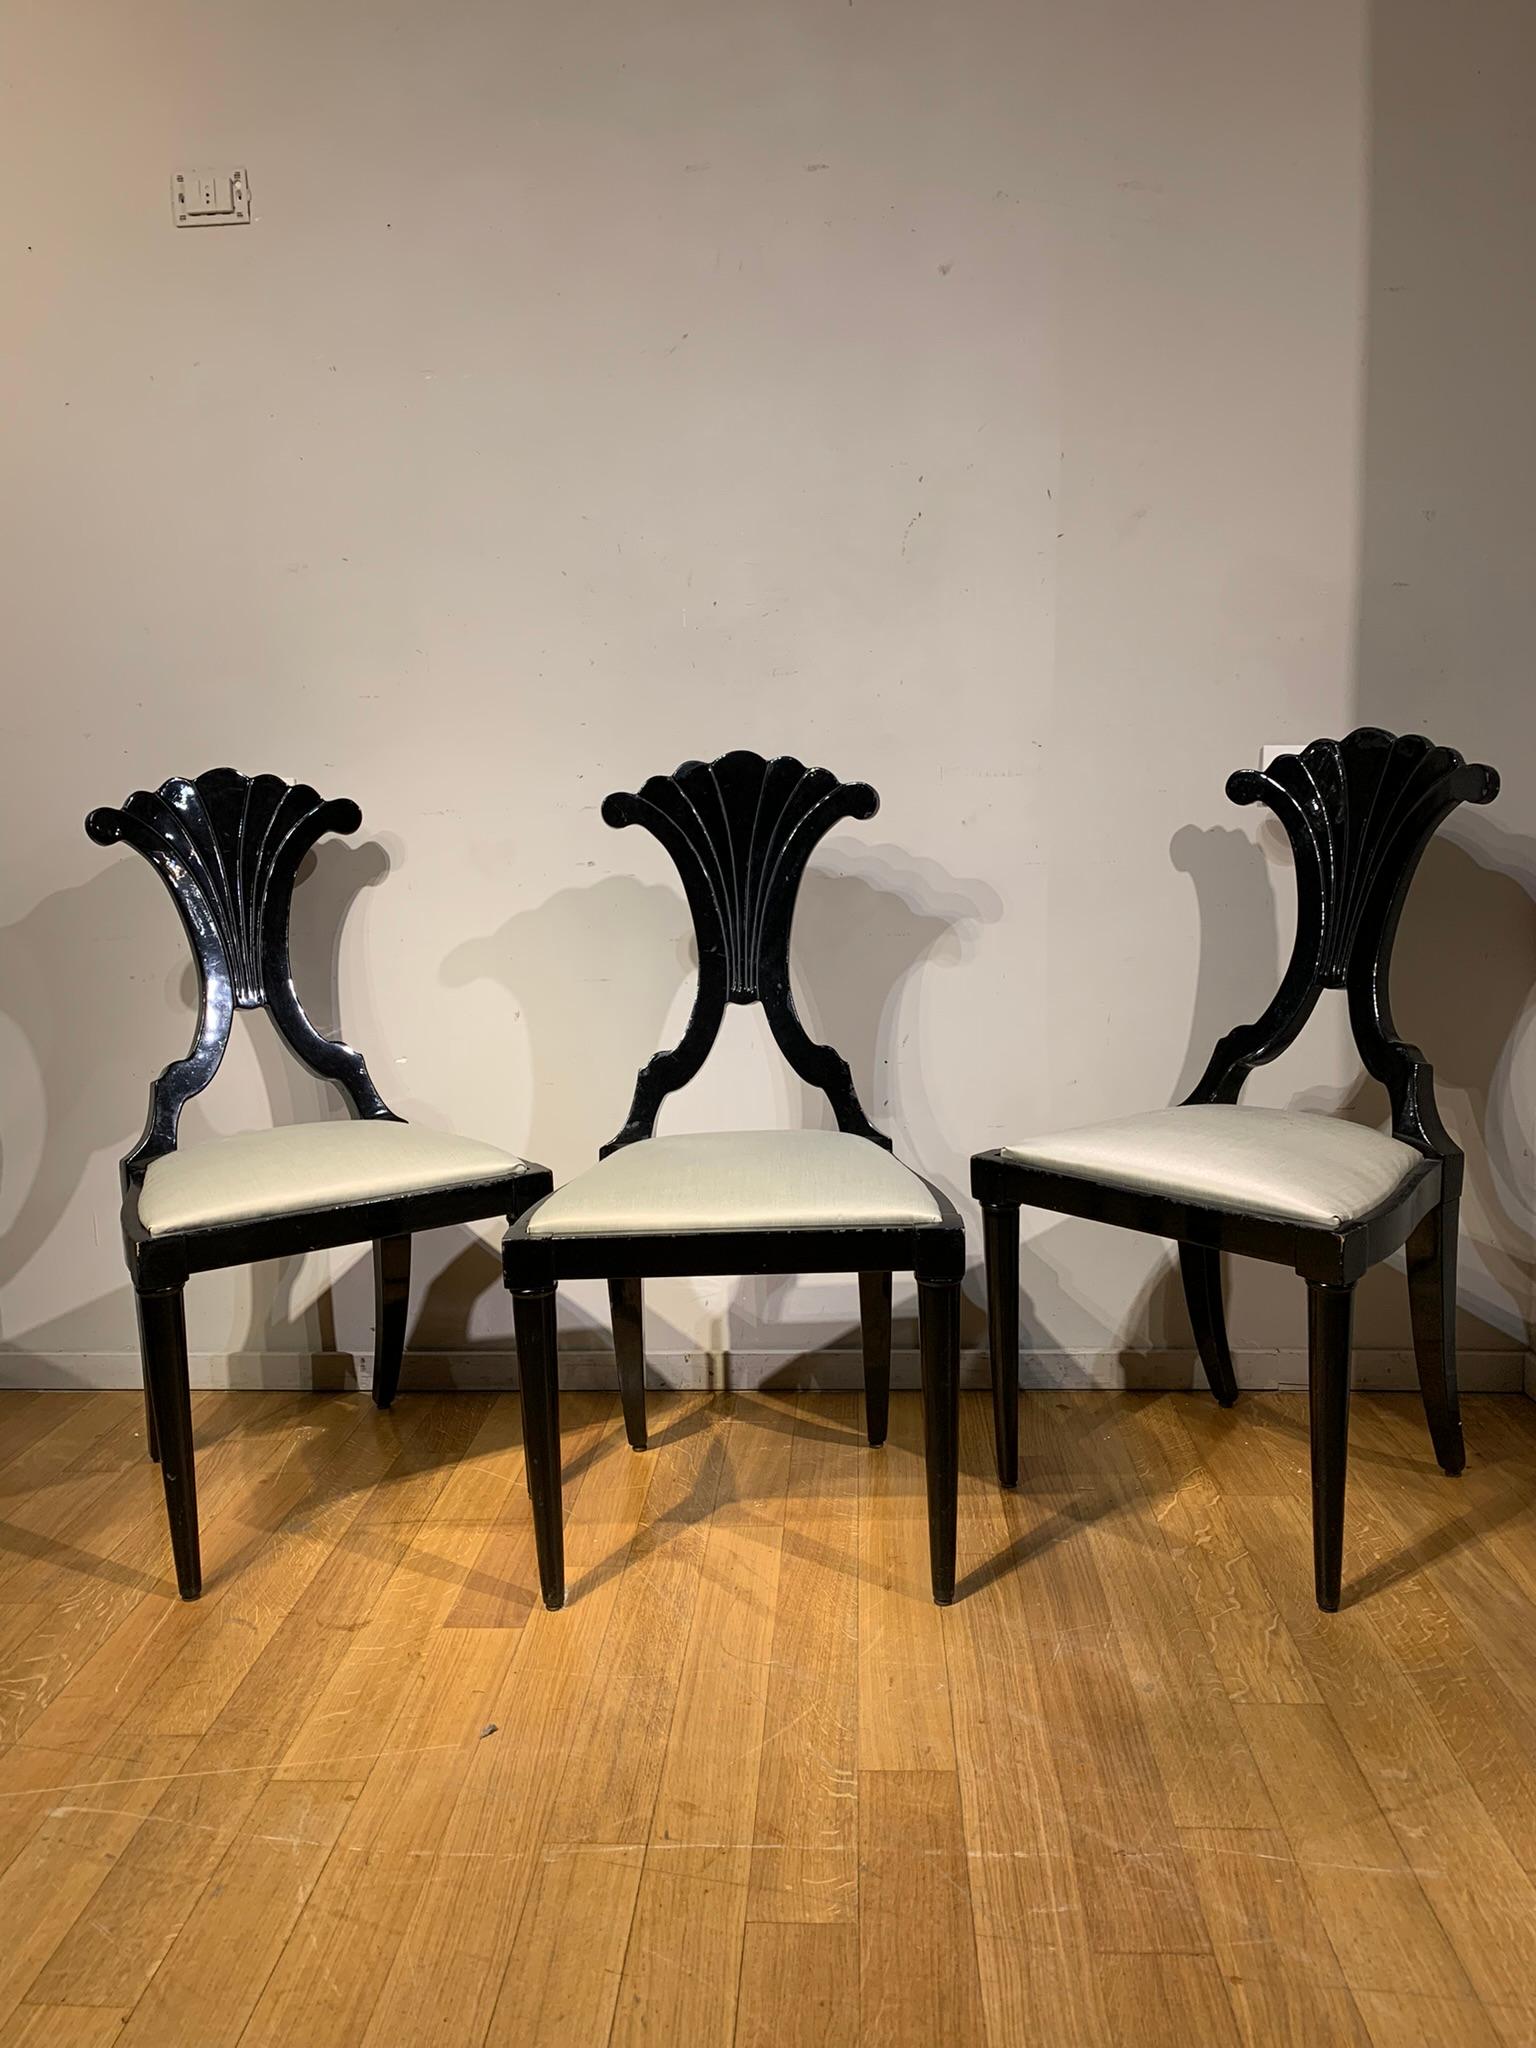 Elegant set consisting of four ebonized wooden chairs, dating back to the mid-19th century, of French manufacture. These chairs feature a chalky underlay, which gives them a sophisticated and distinctive look. The most peculiar feature of these